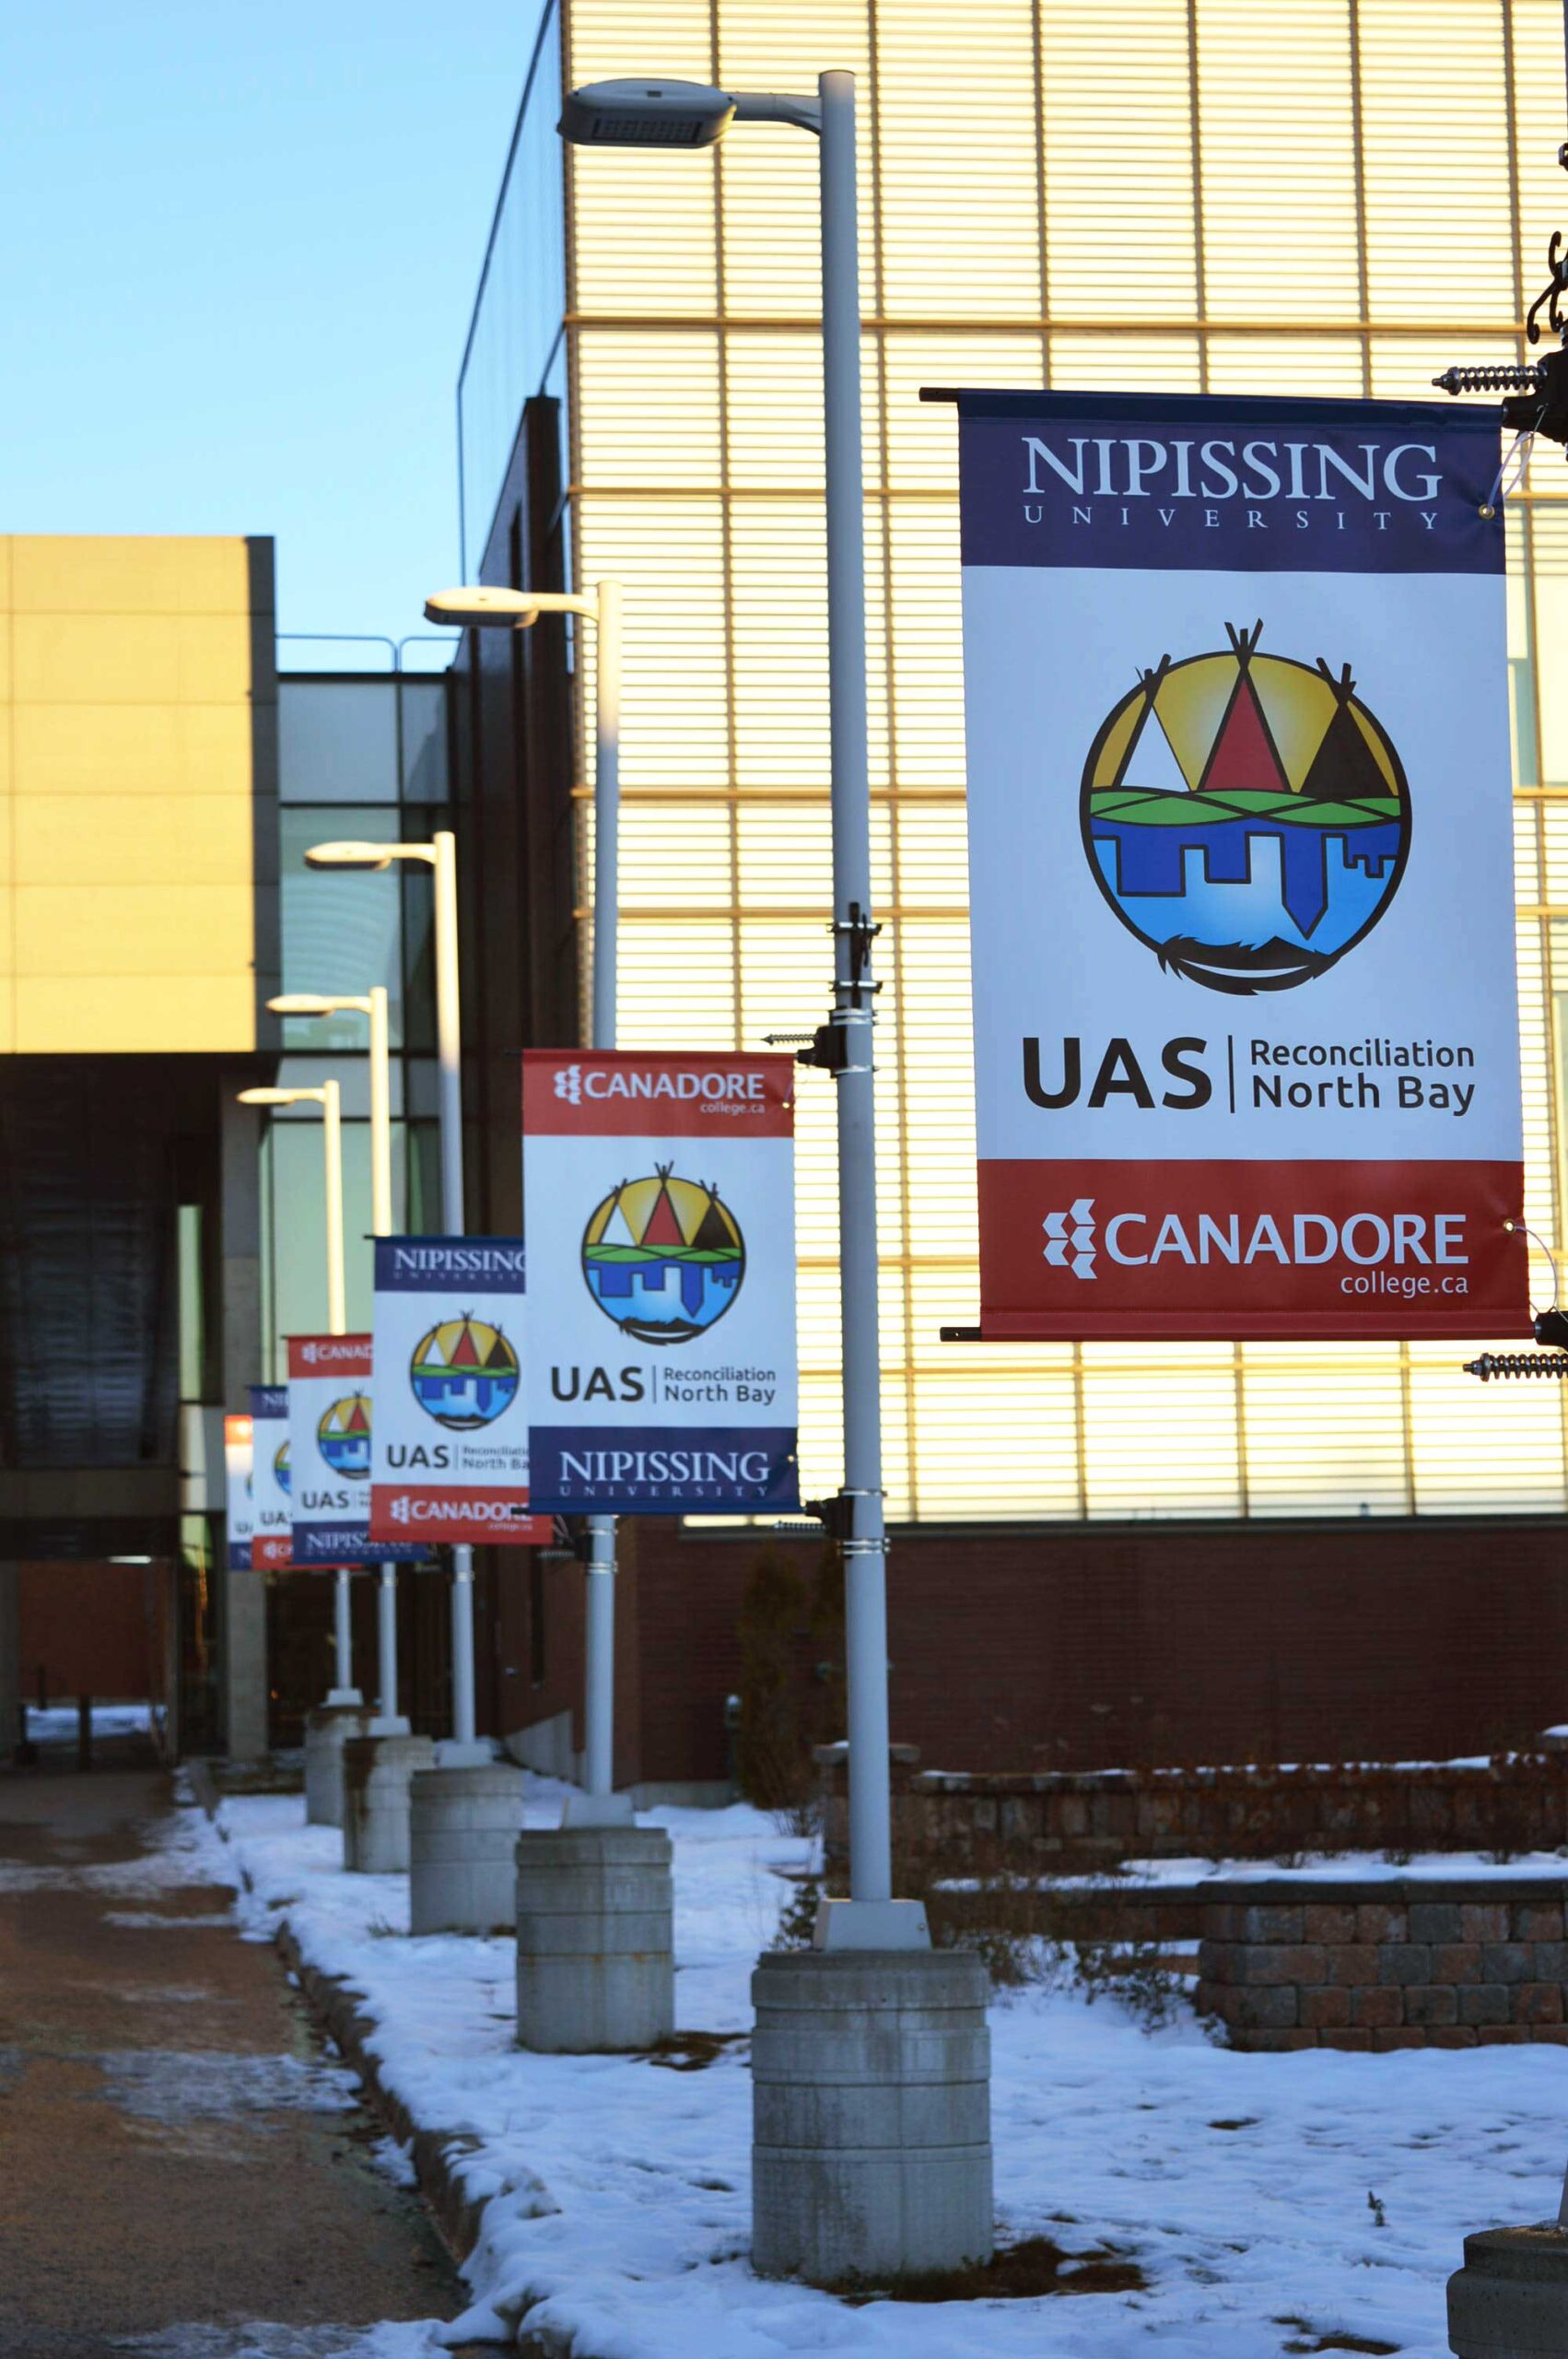 Canadore College & Nipissing University Campus Banners